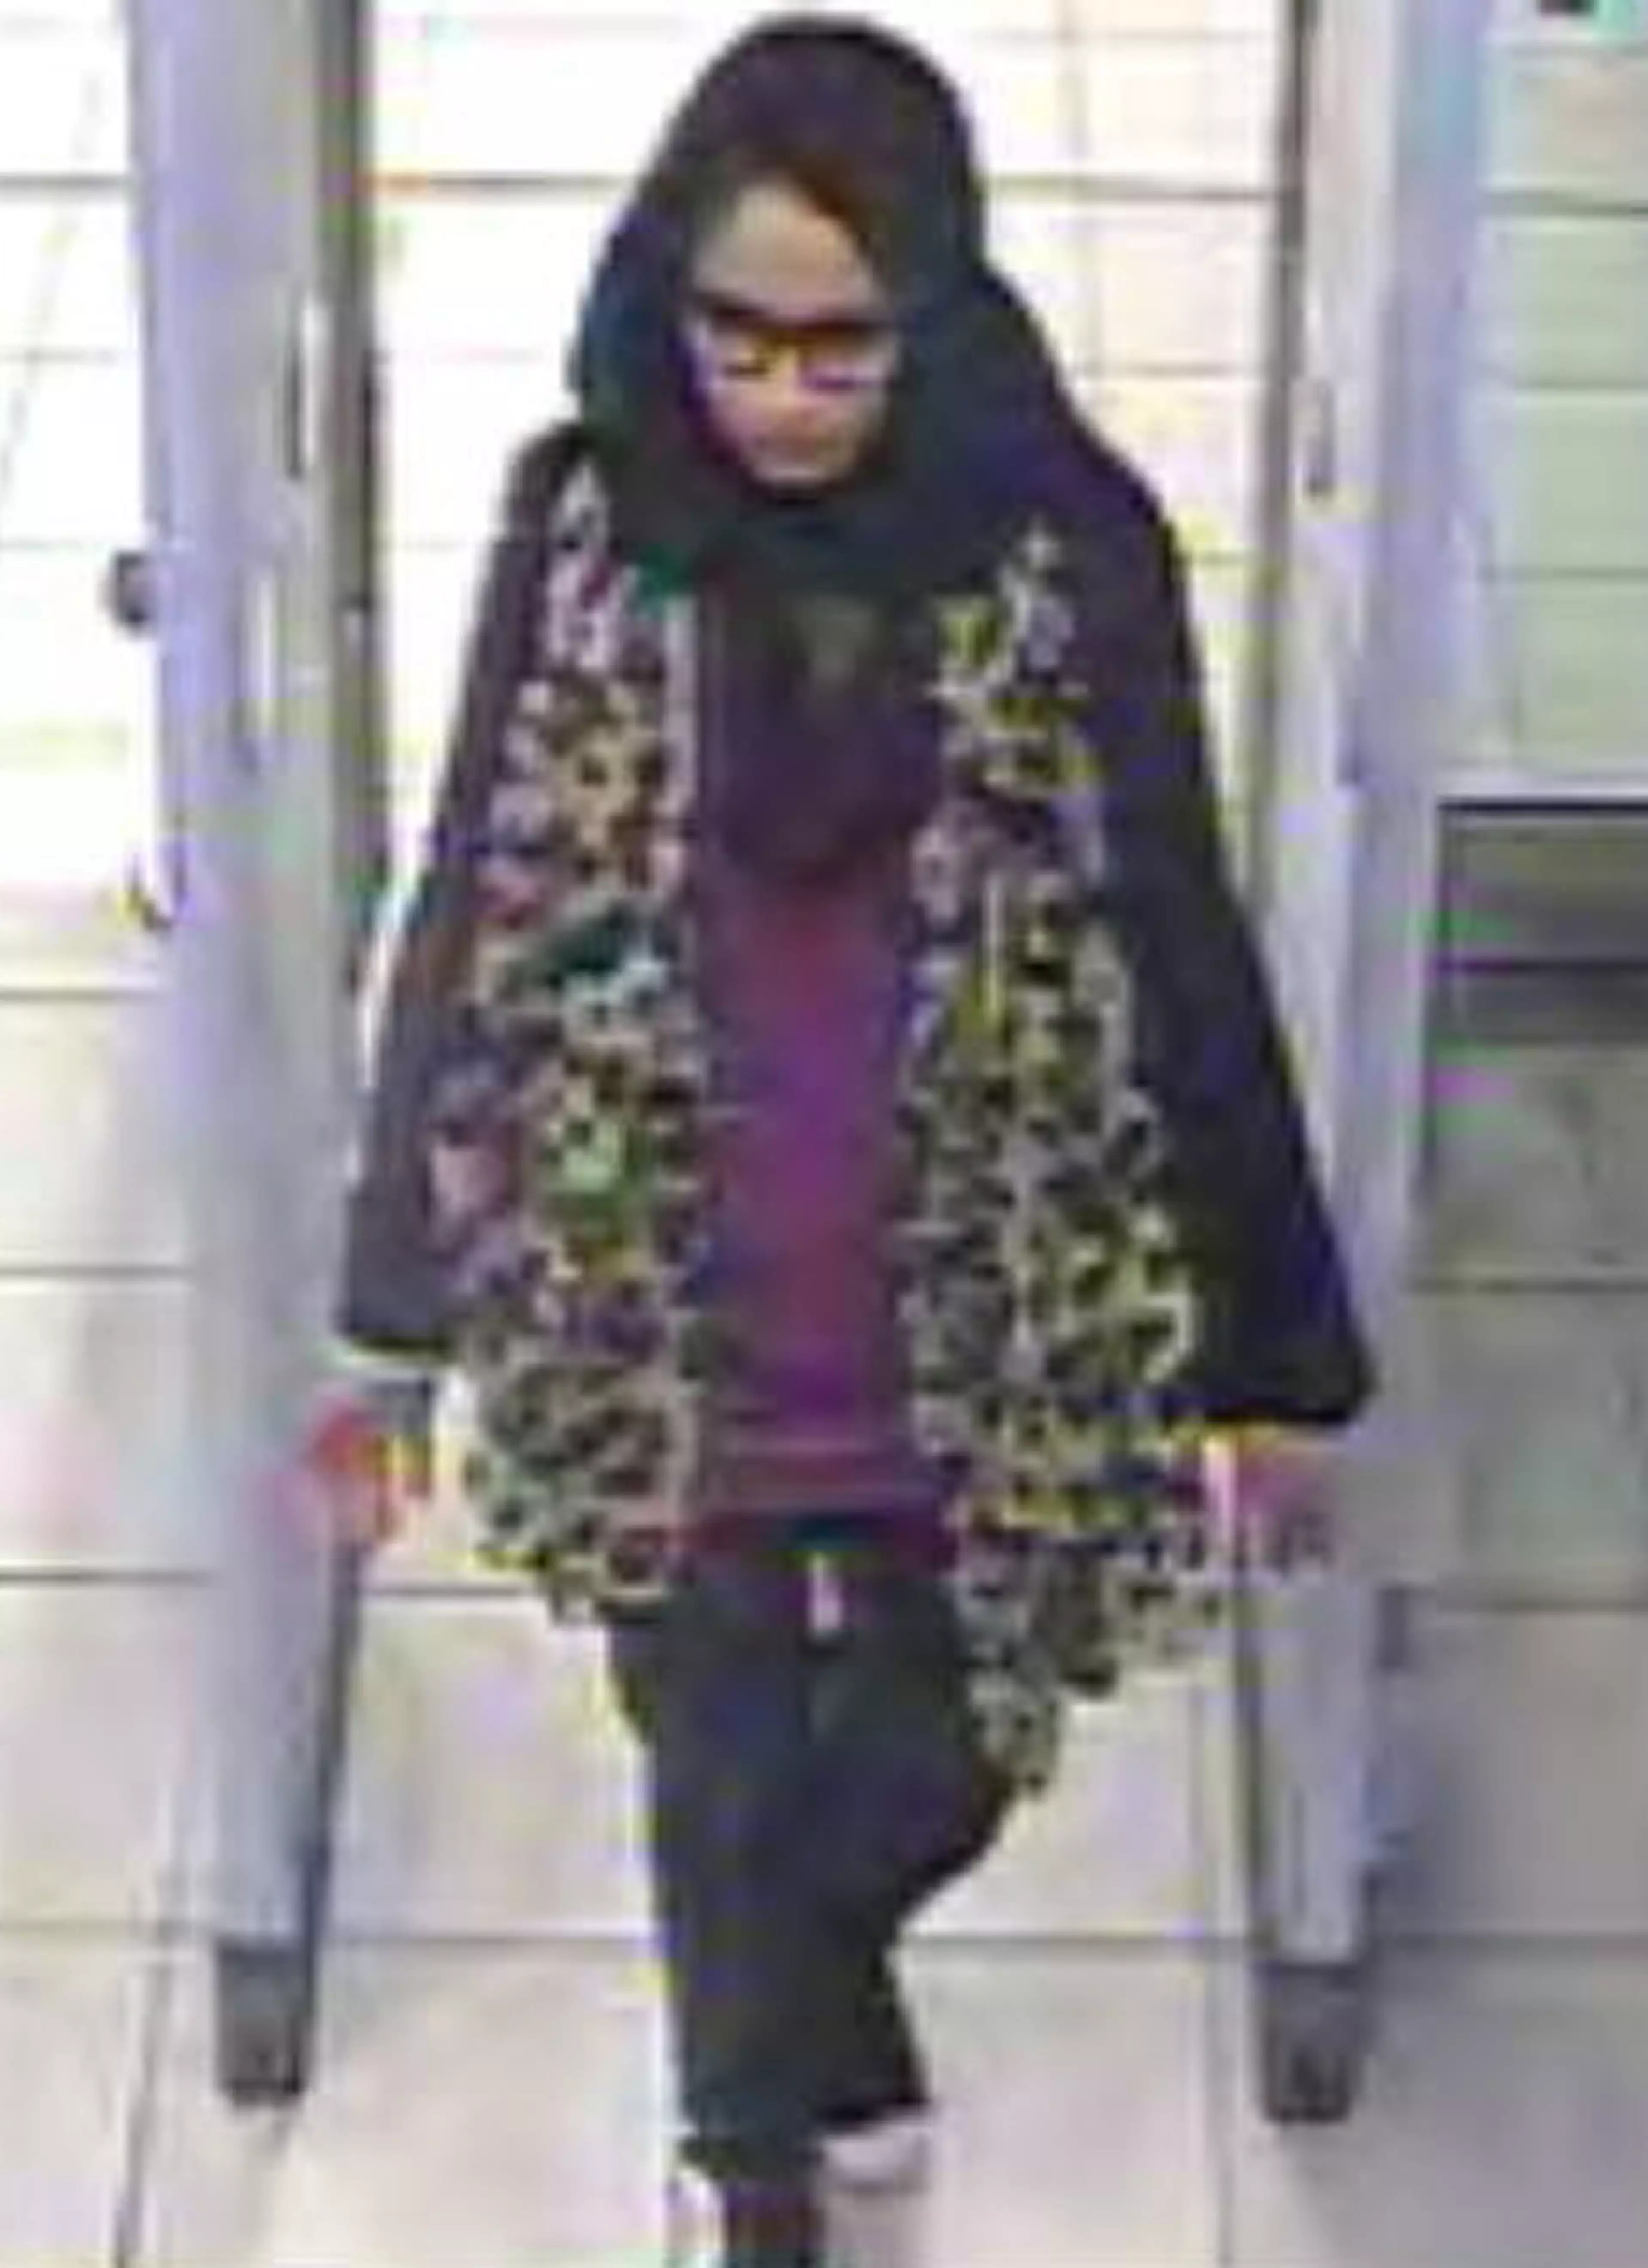 Shamima Begum ran away from the UK to join ISIS when she was 15.